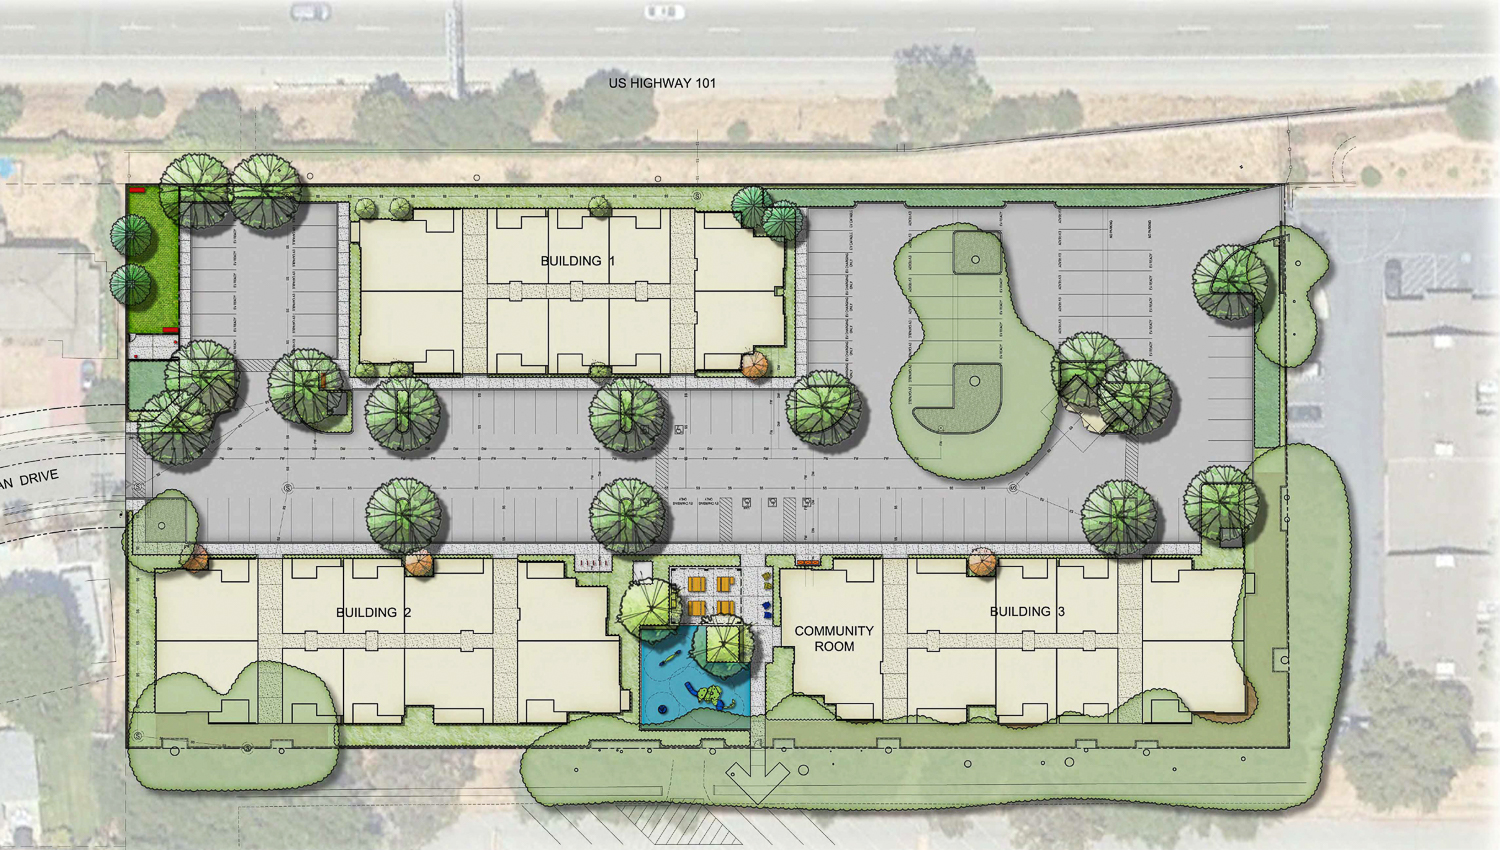 320 Sheridan Drive site map, illustration by SDG Architects